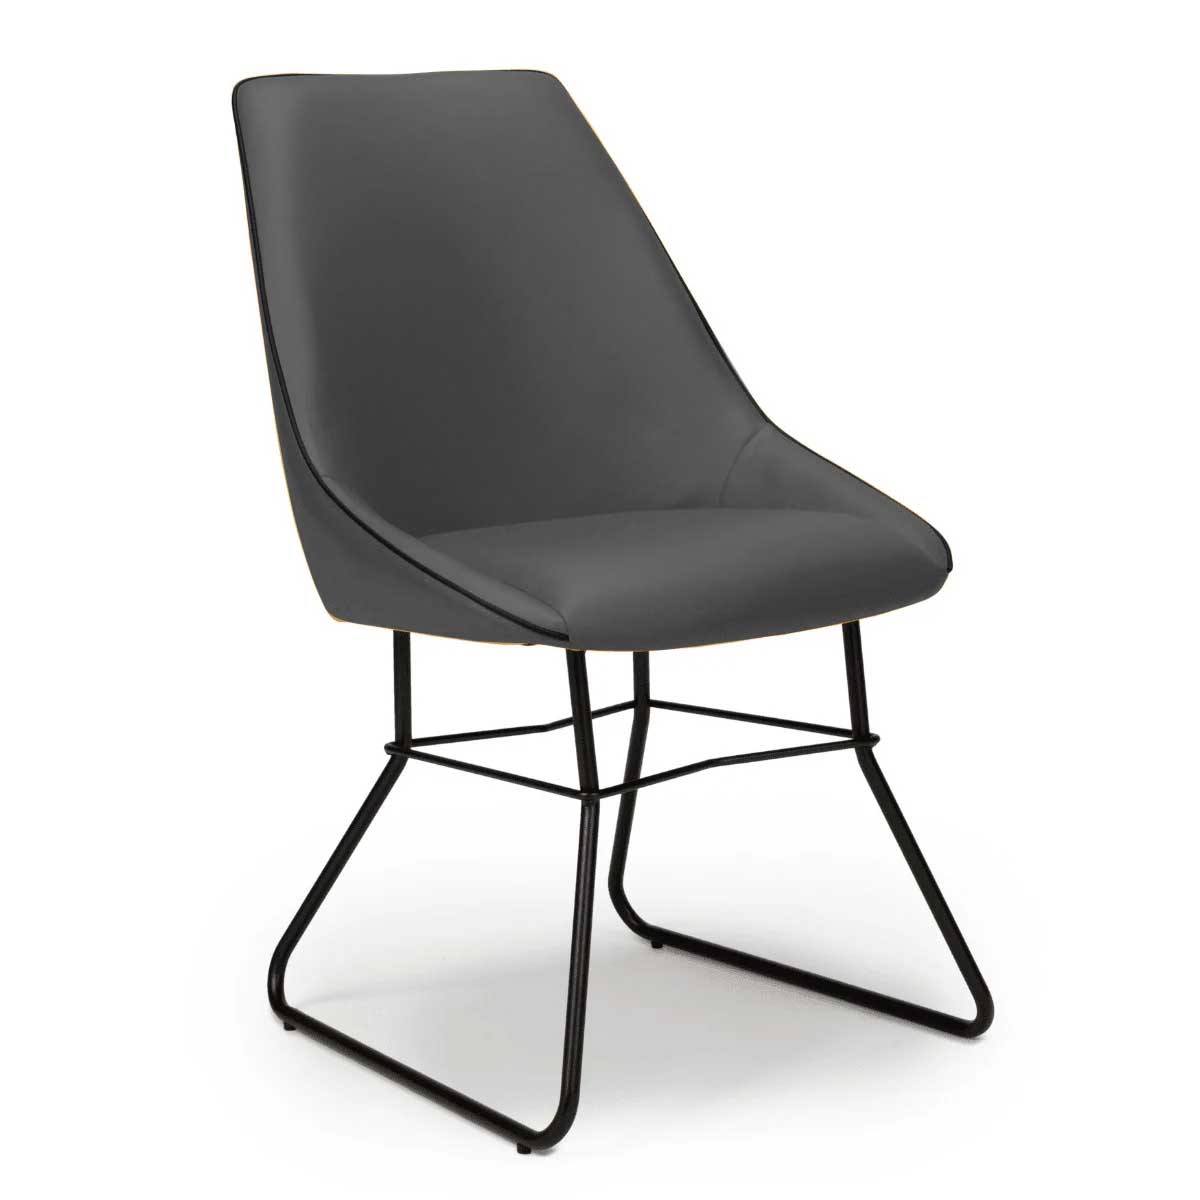 Carrig Black Dining Chair